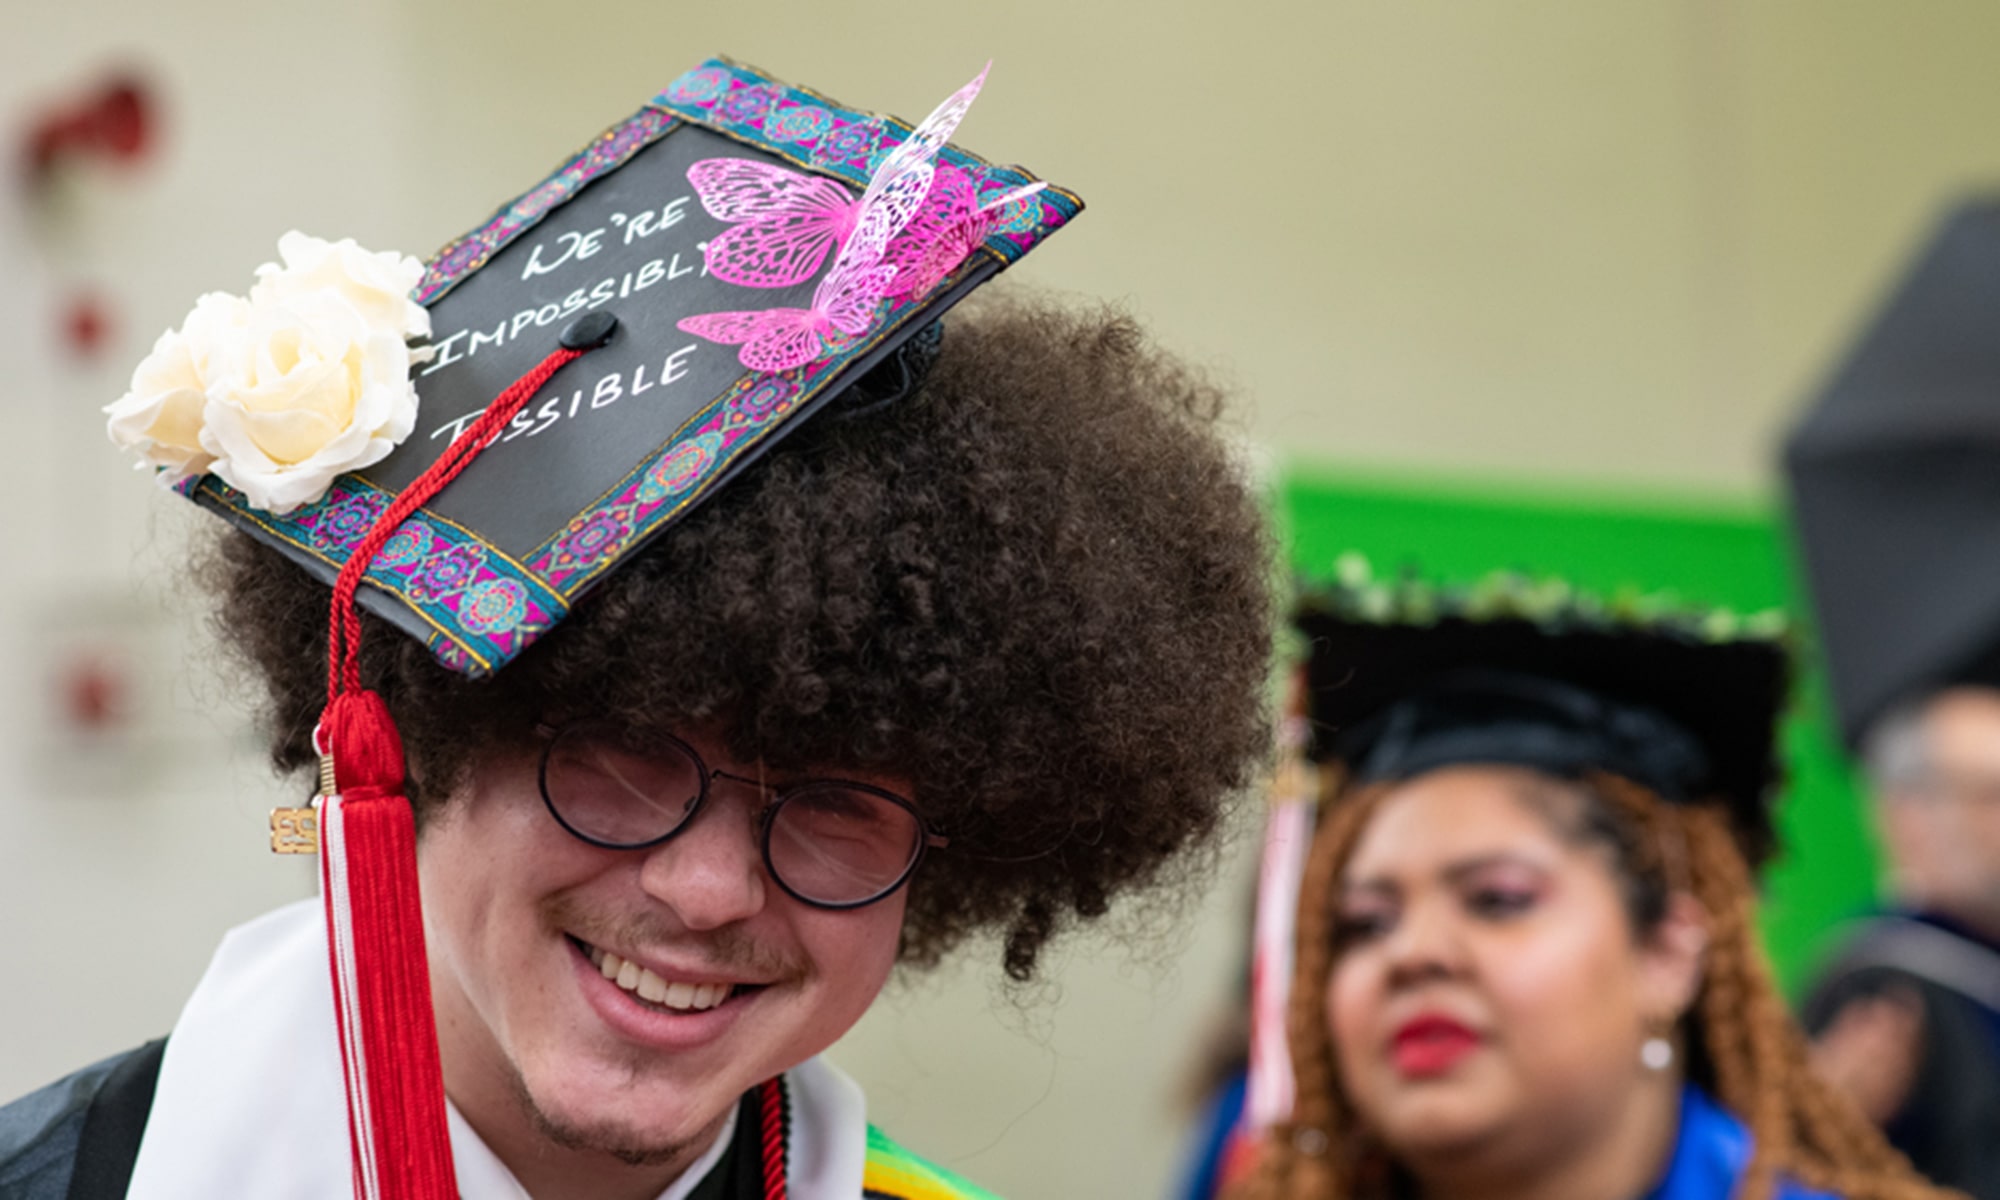 Student graduation cap decorated with butterflies and roses that reads 'we're impossible impossible'